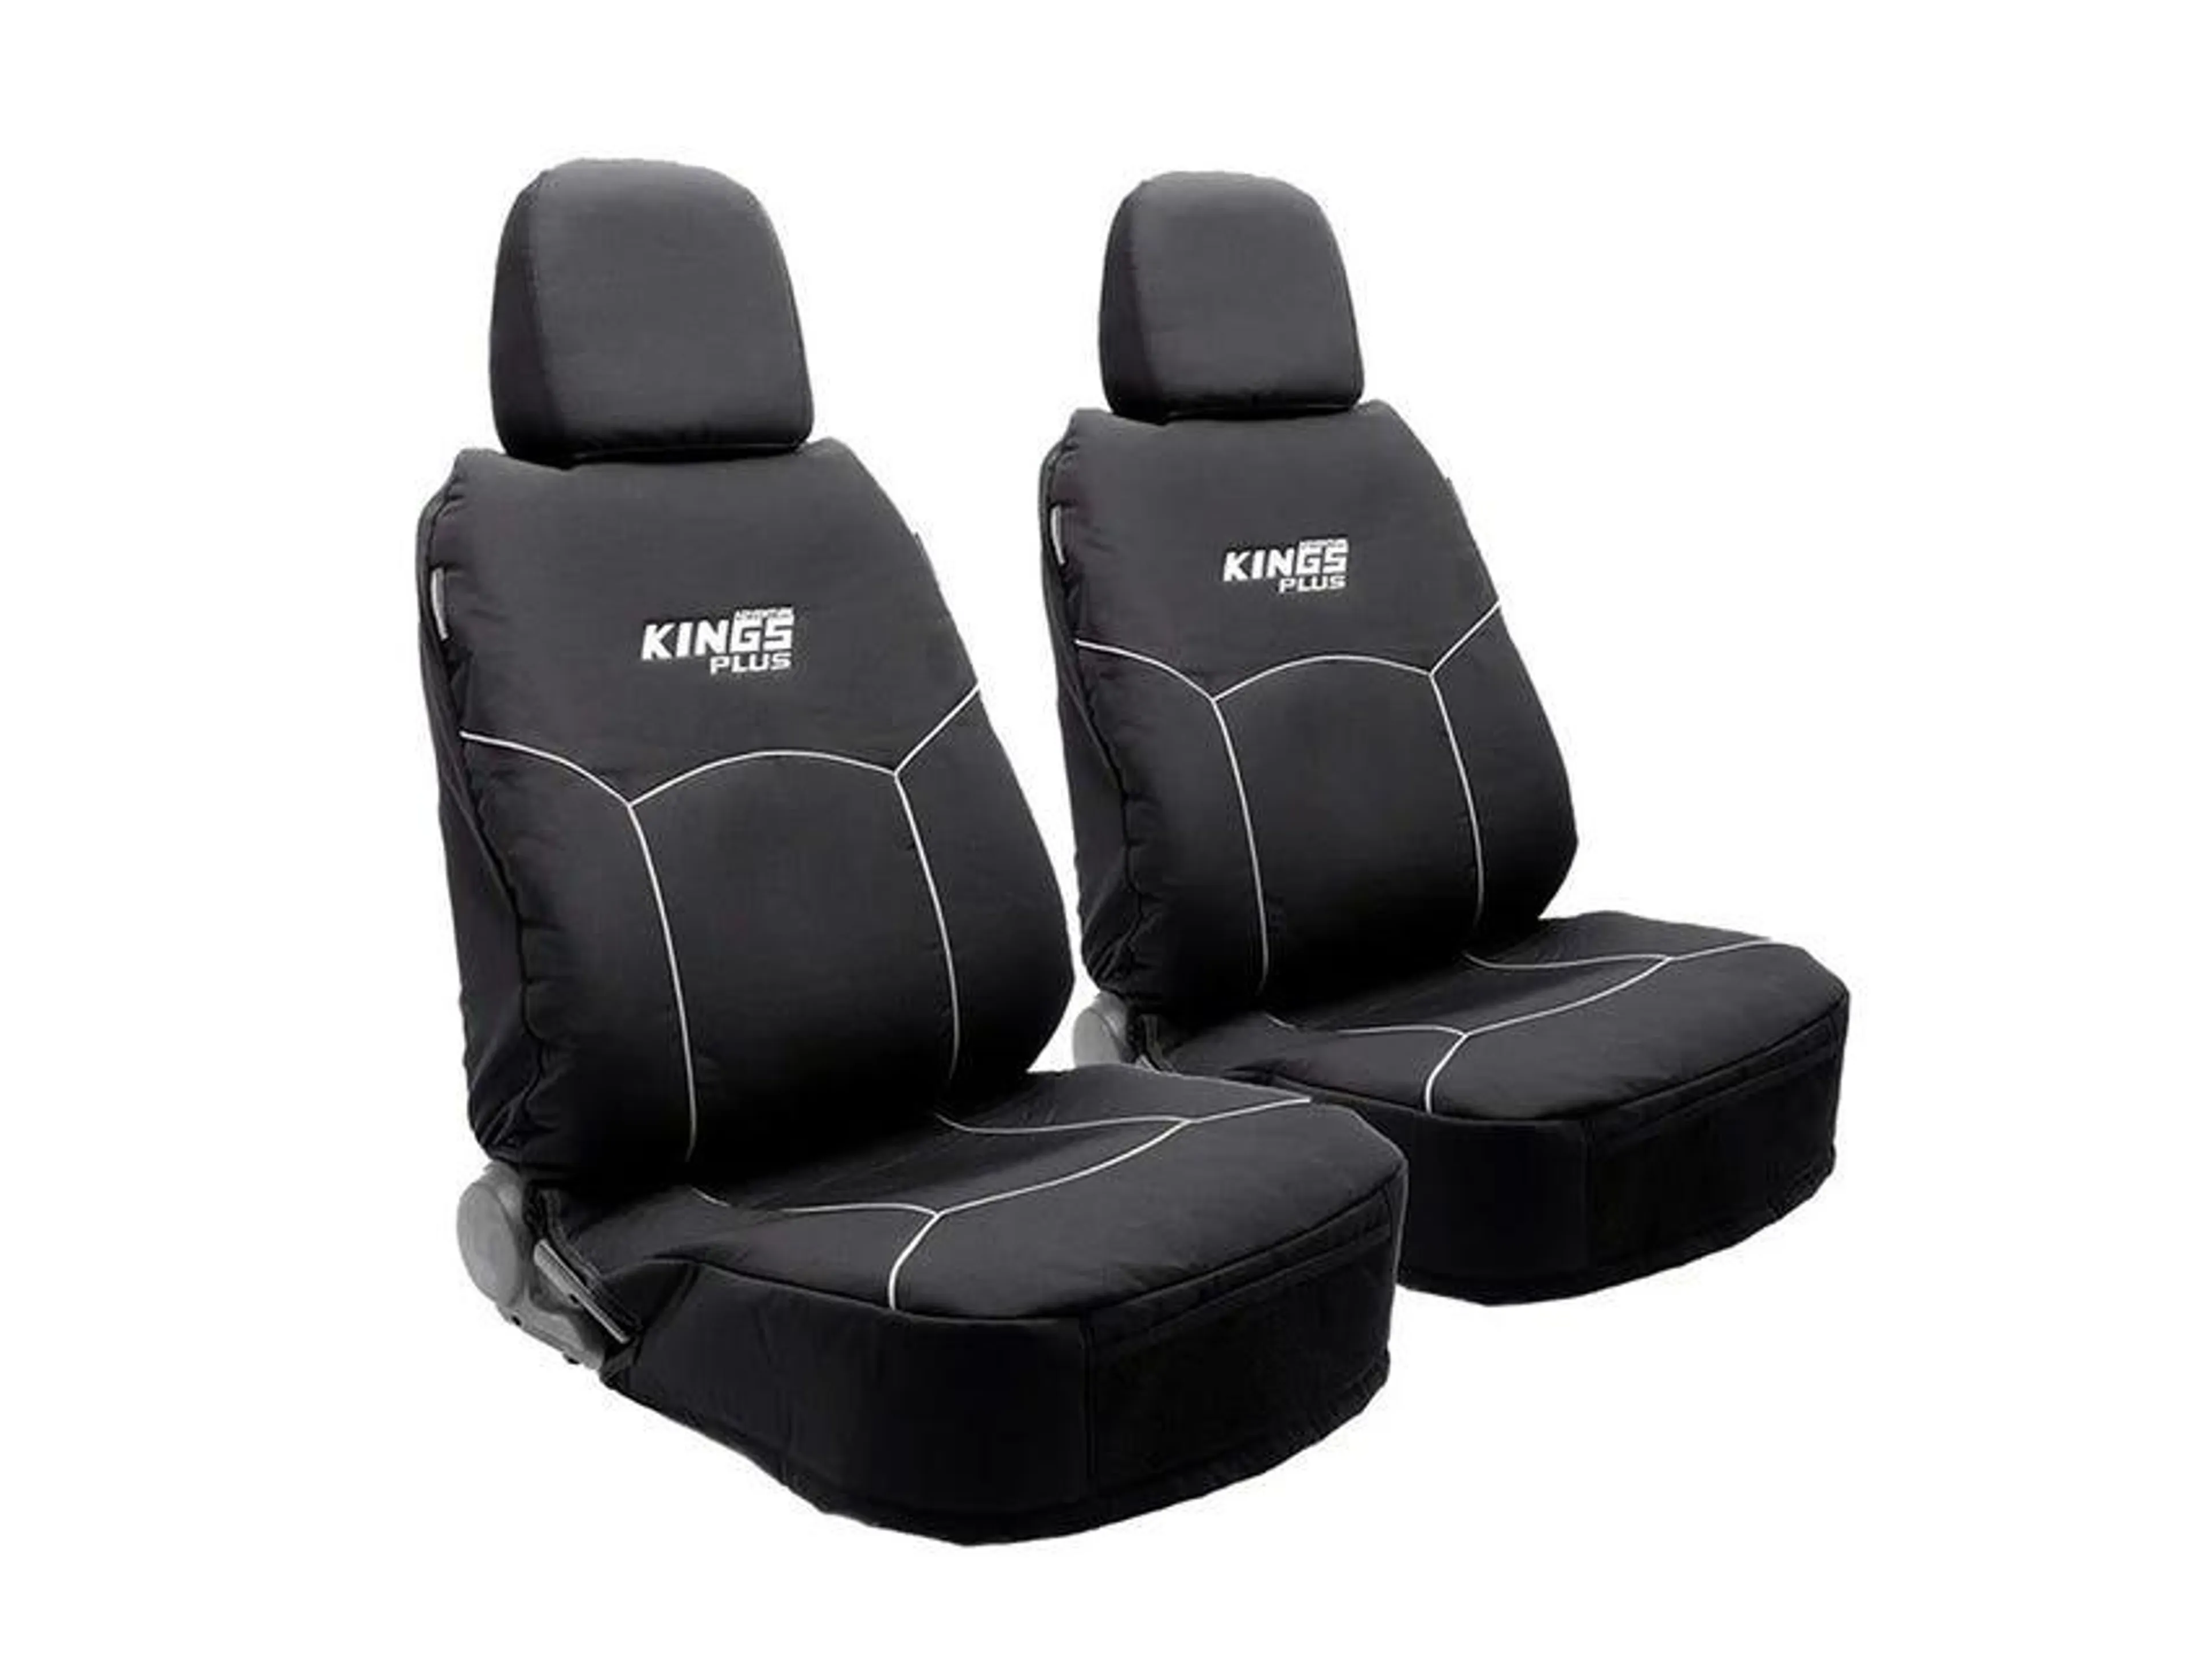 Kings Plus Premium Seat Covers (Pair) | Heavy-Duty 12oz Canvas | Universal Fit | Thick Padded Seat and Backrest